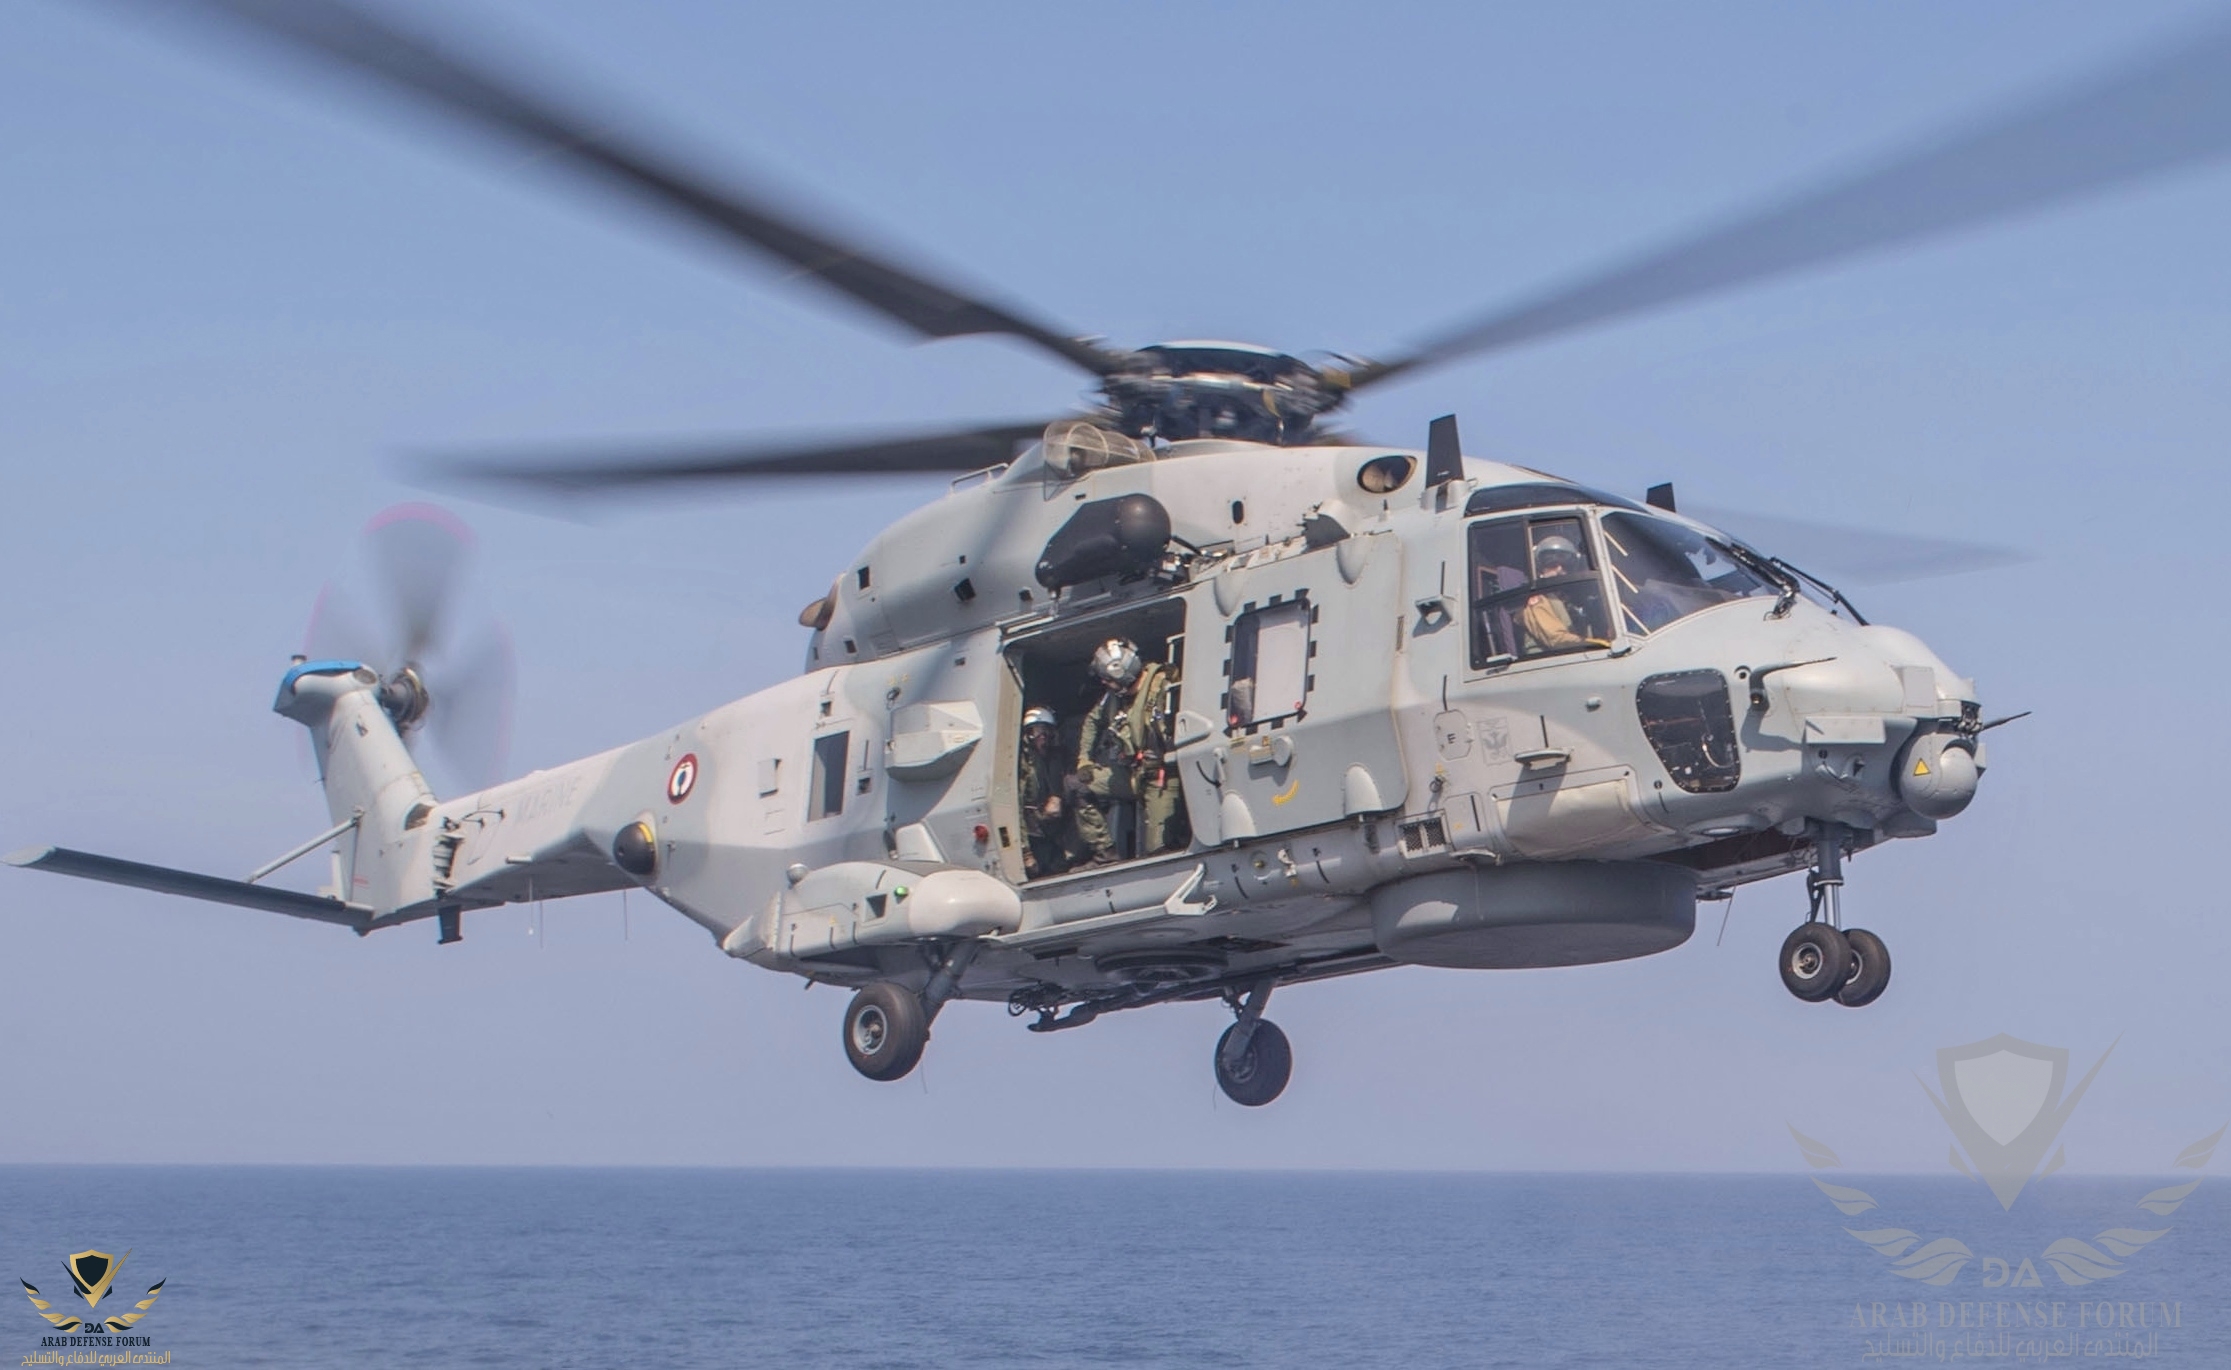 French_Navy_NH90_lands_on_USS_Antietam_(CG-54)_in_the_Bay_of_Bengal_(cropped).jpg